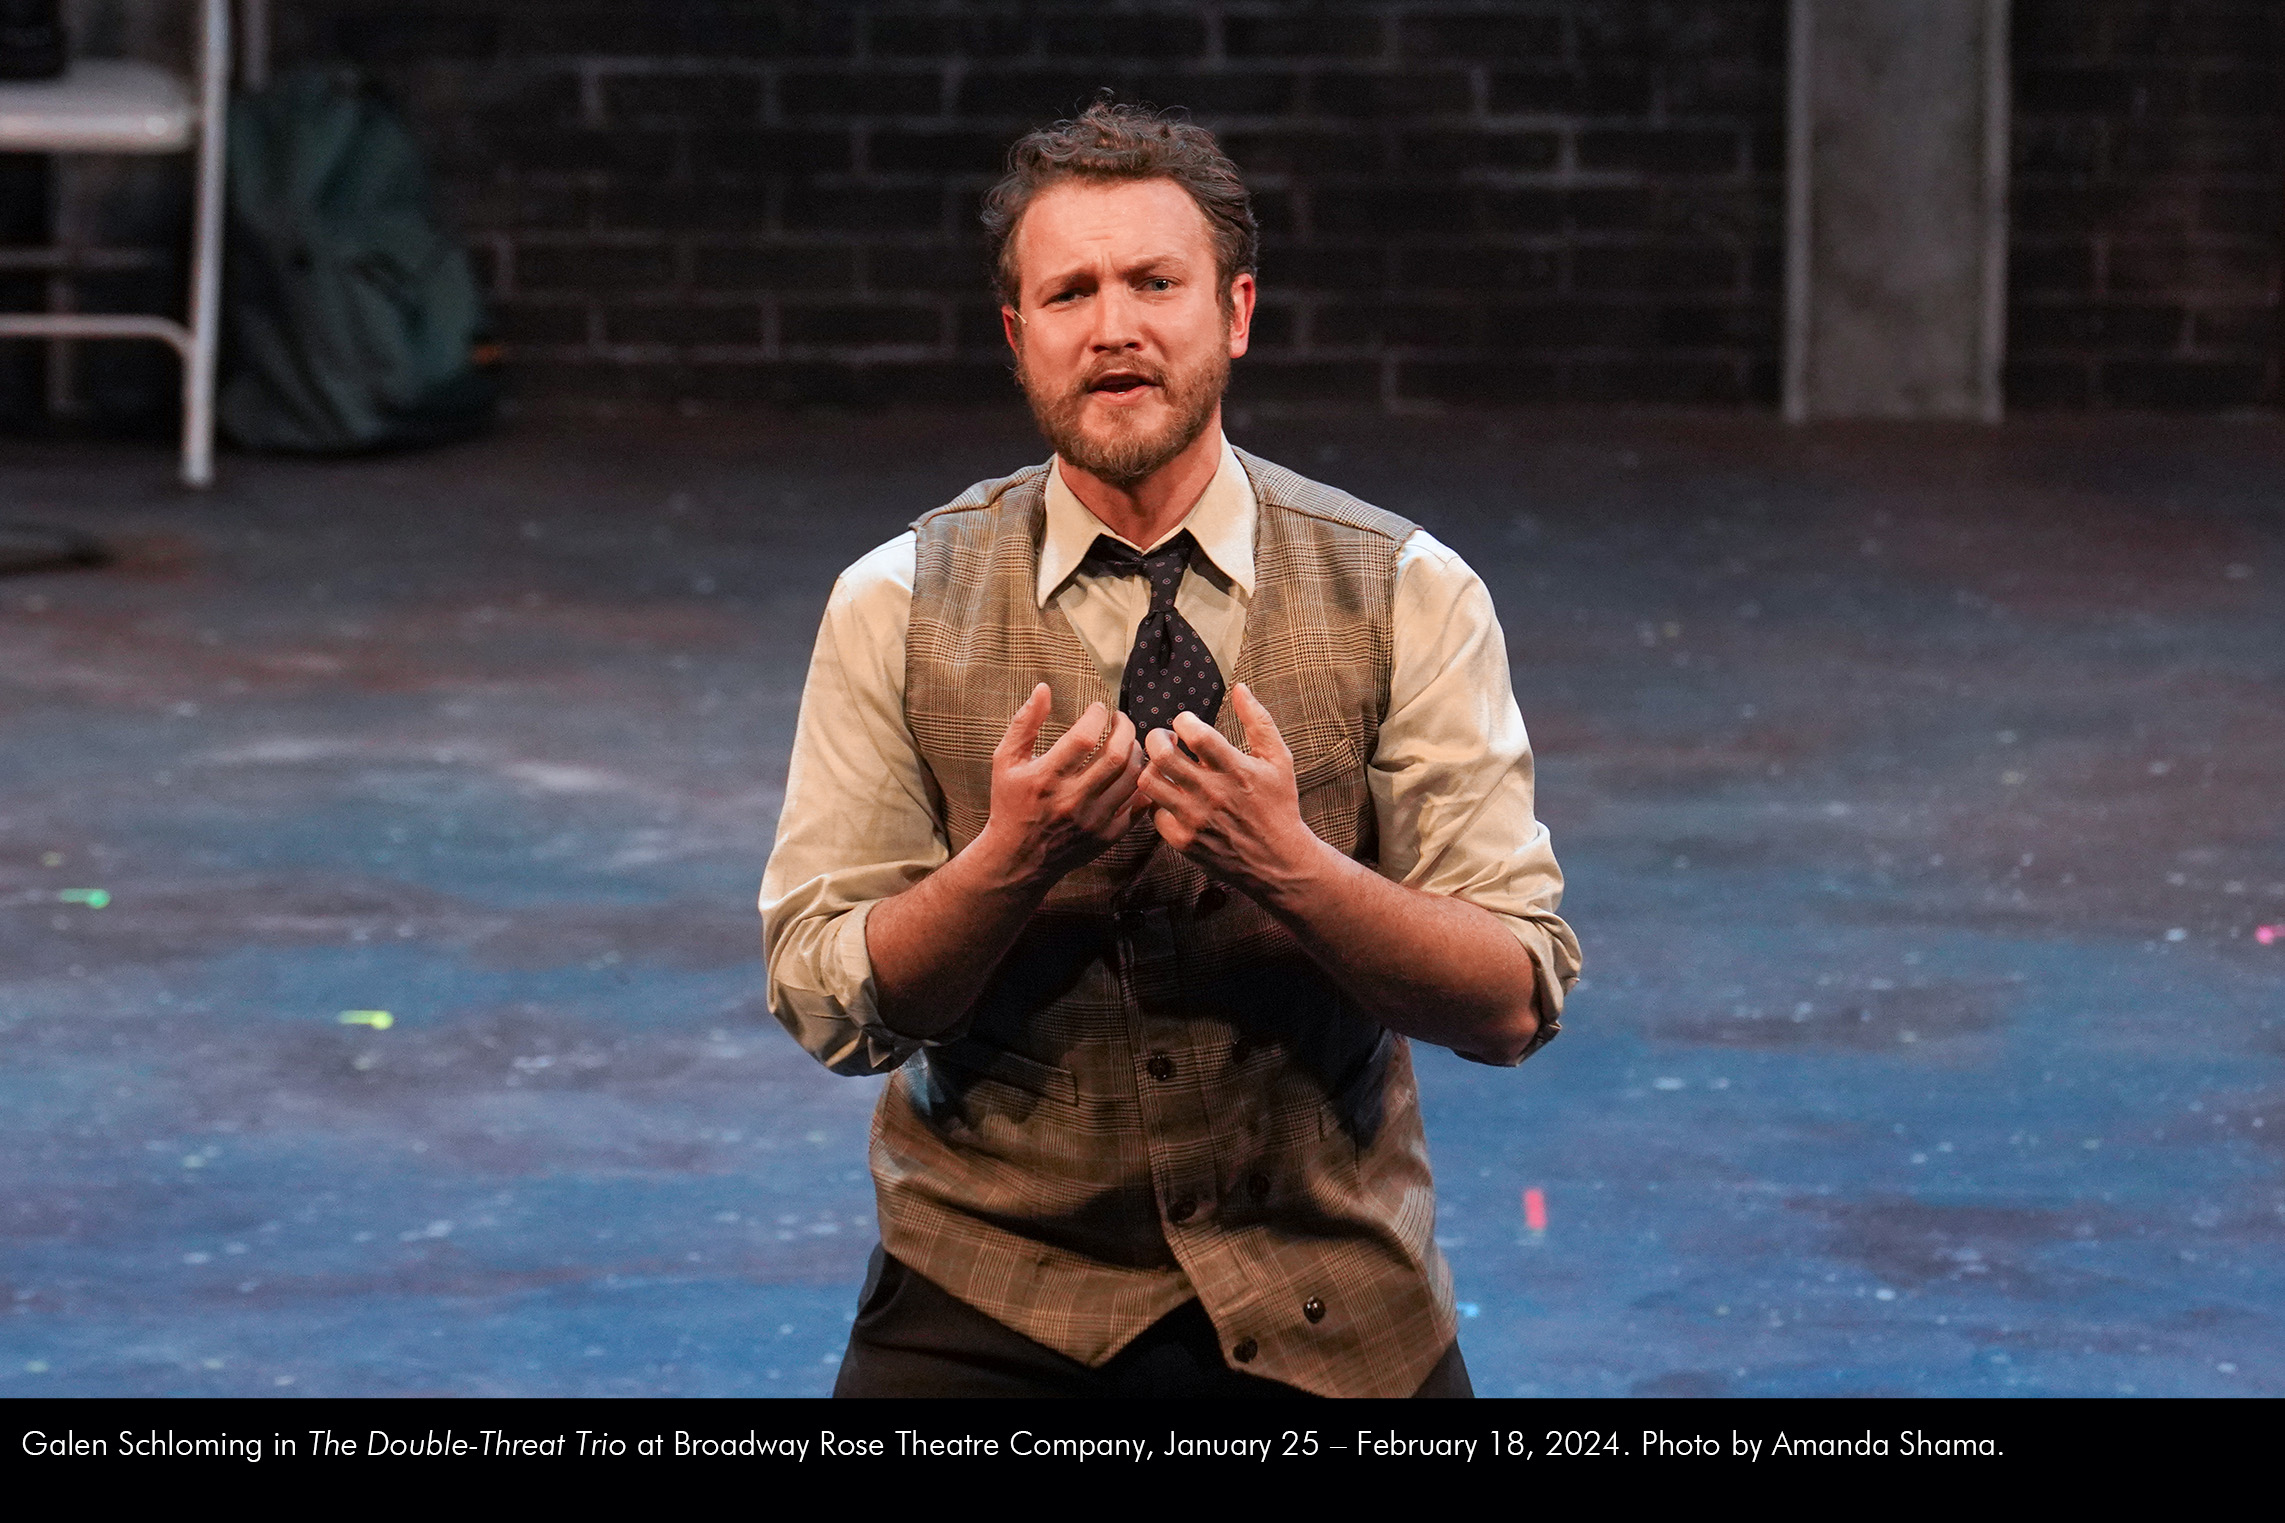 Galen Schloming in The Double-Threat Trio at Broadway Rose Theatre Company, January 25 - February 18, 2024. Photo by Amanda Shama.